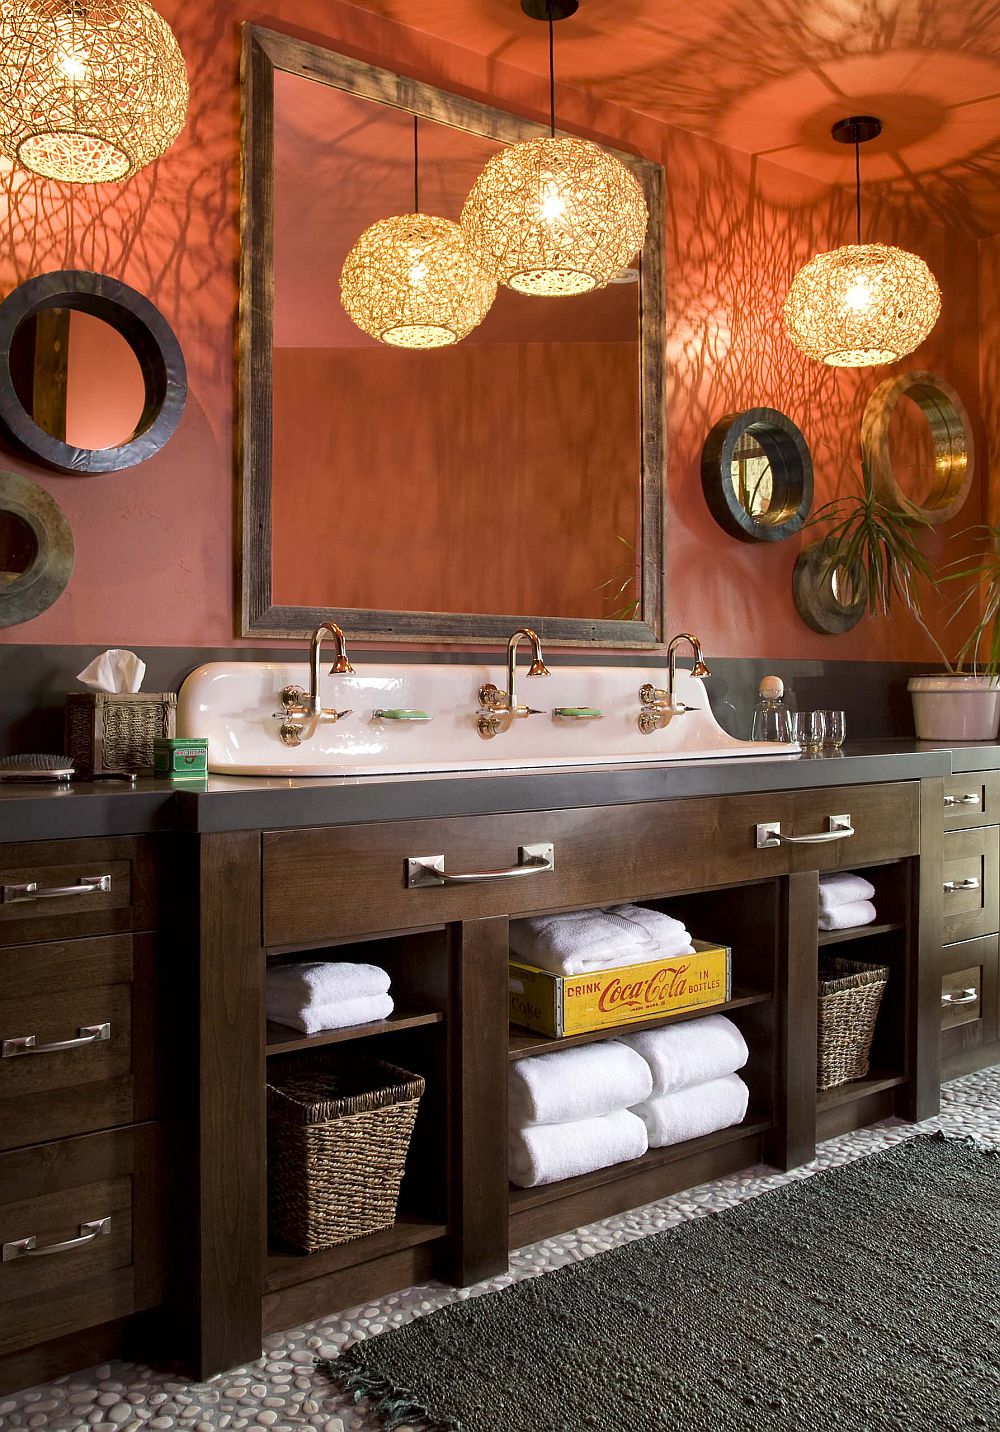 Lighting-adds-a-brilliant-appeal-to-the-bathroom-in-orange